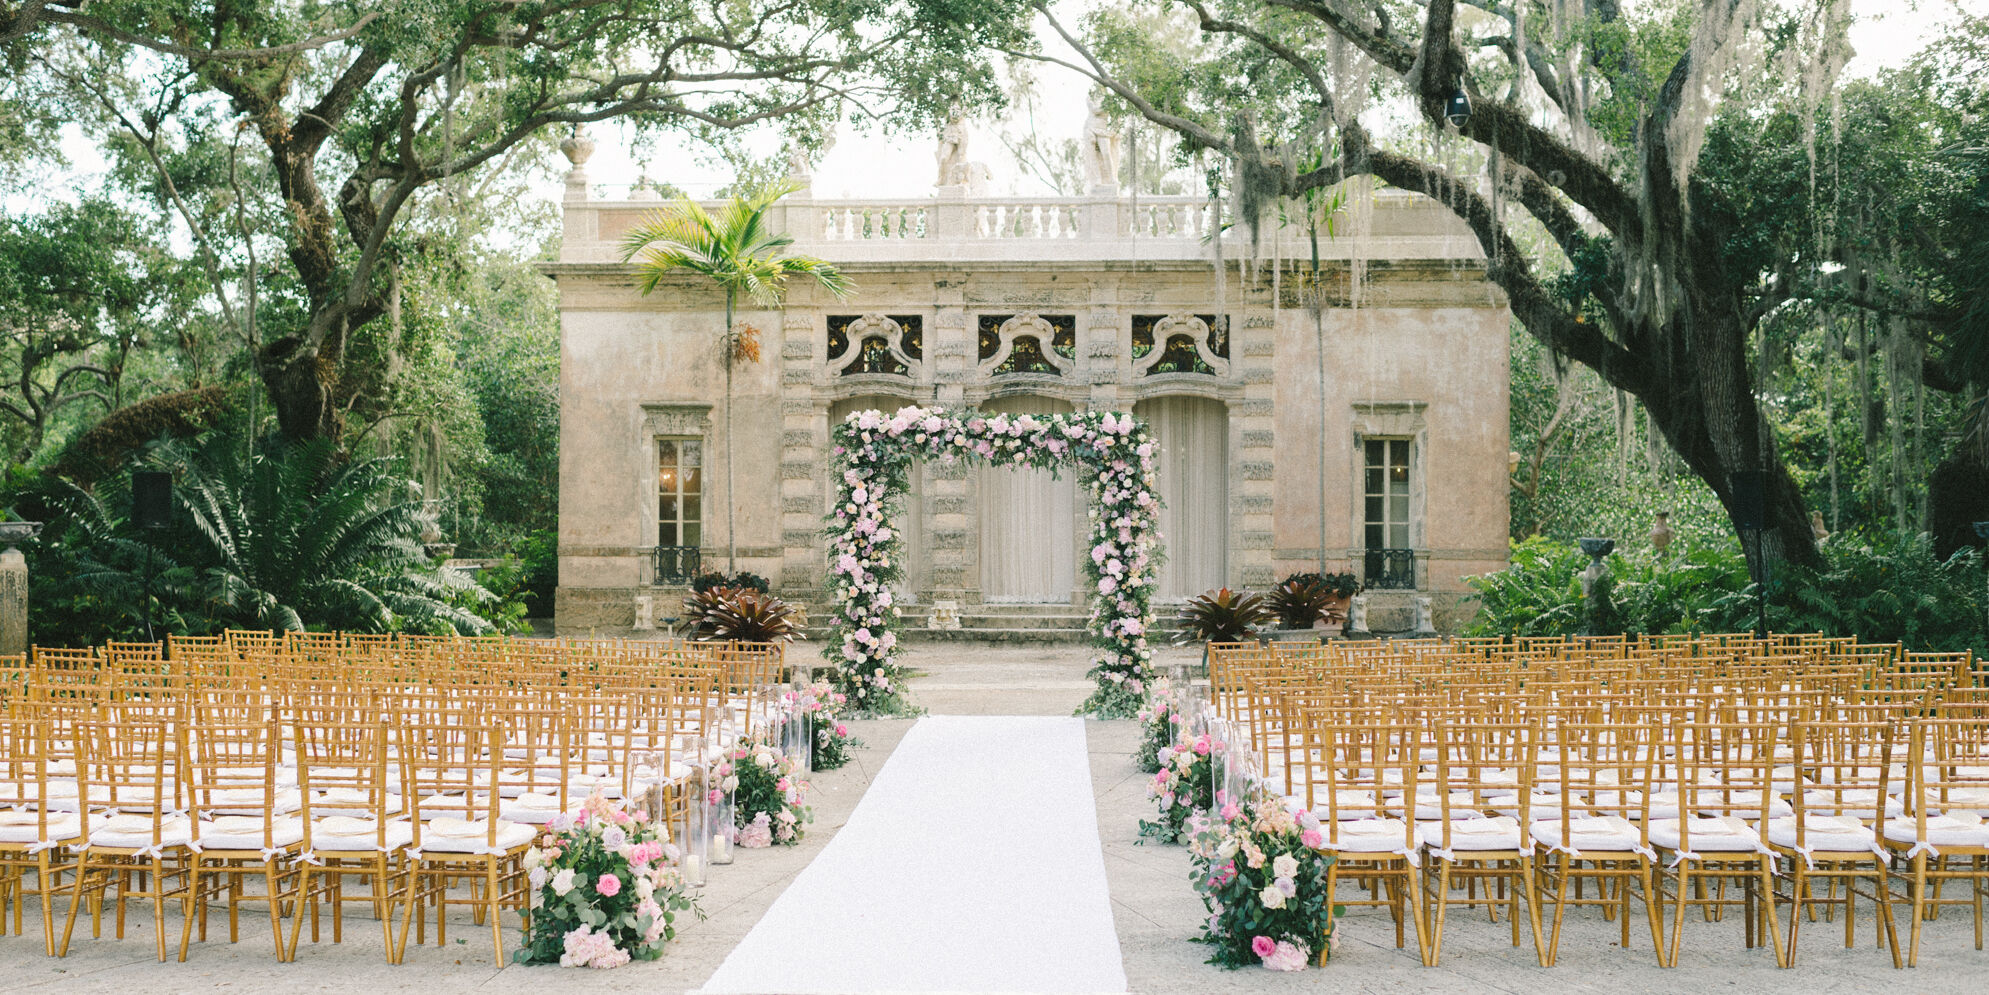 Pink flowers and greenery adorned the ceremony space at a glam, garden wedding in Miami.